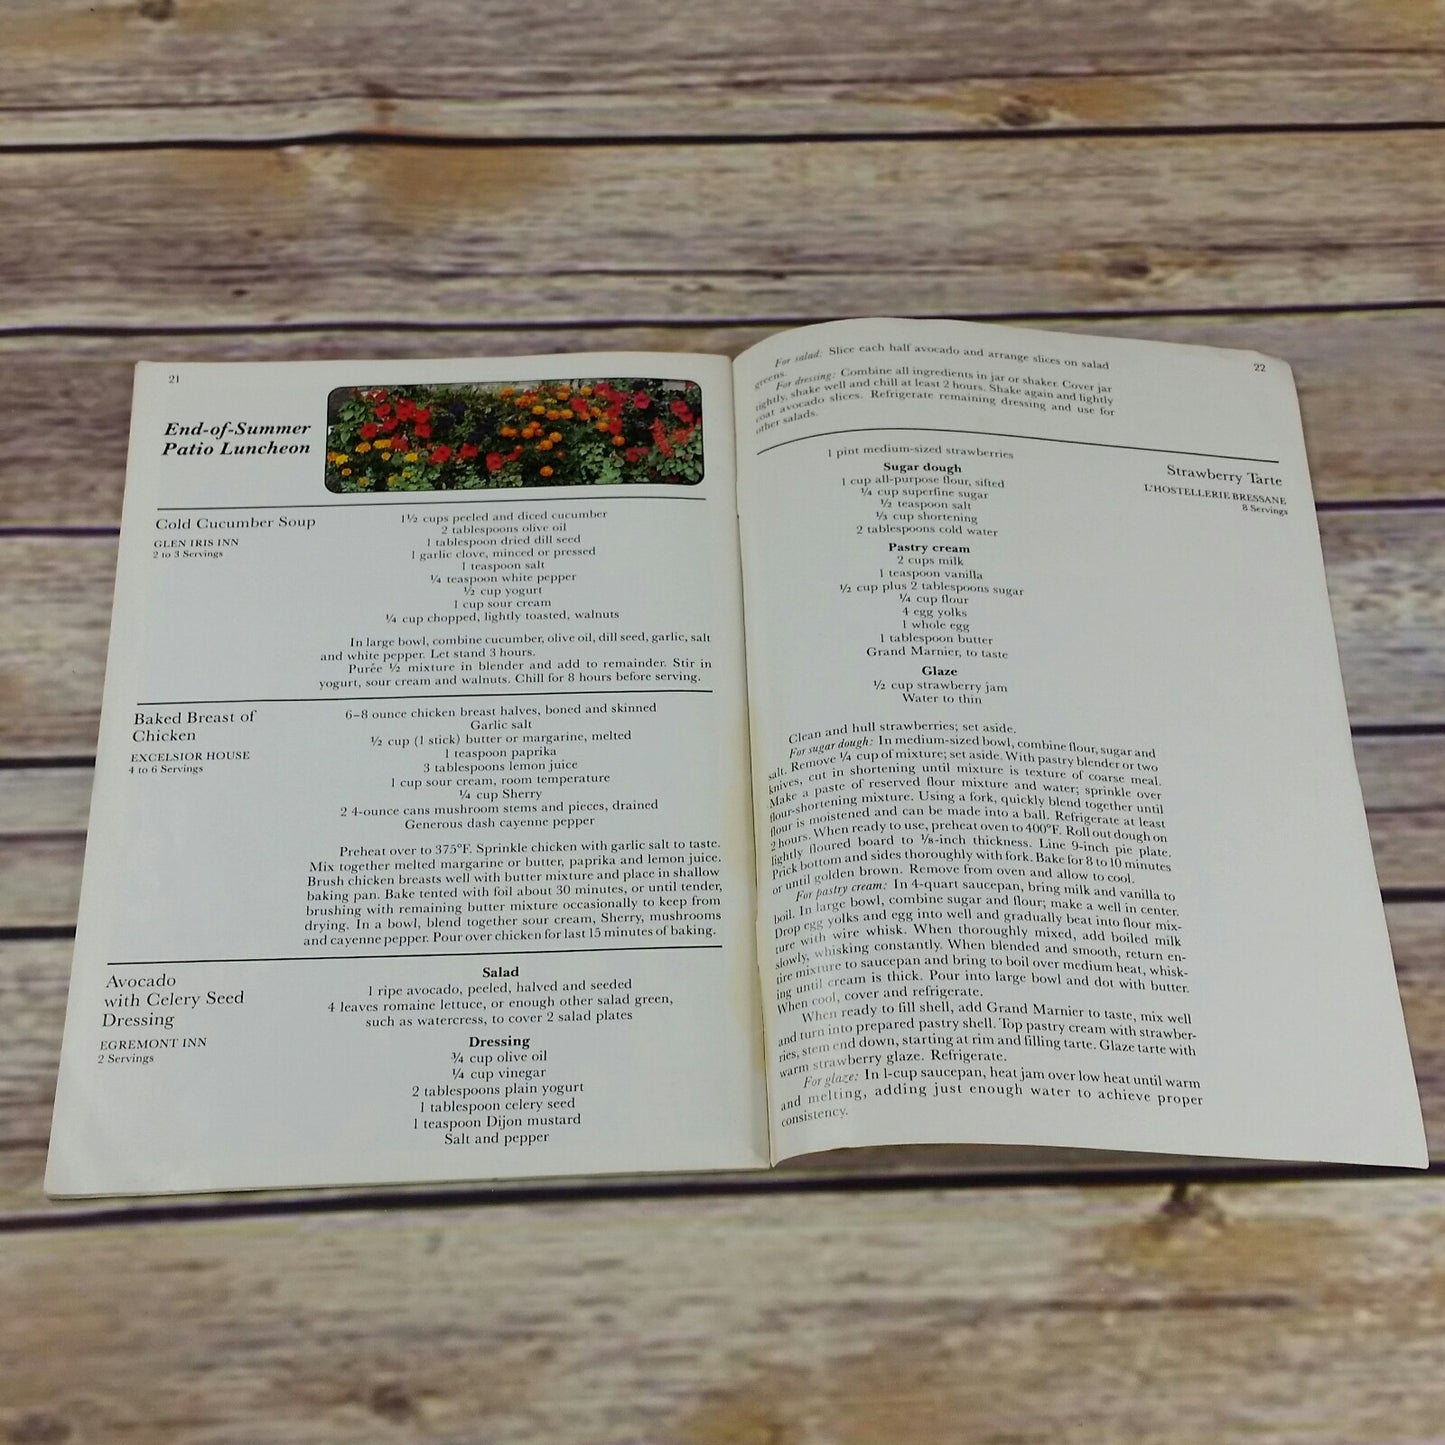 Vintage Cookbook Country Inn Buffets Favorite Recipes from the Country Inns of America 1980 Booklet - At Grandma's Table